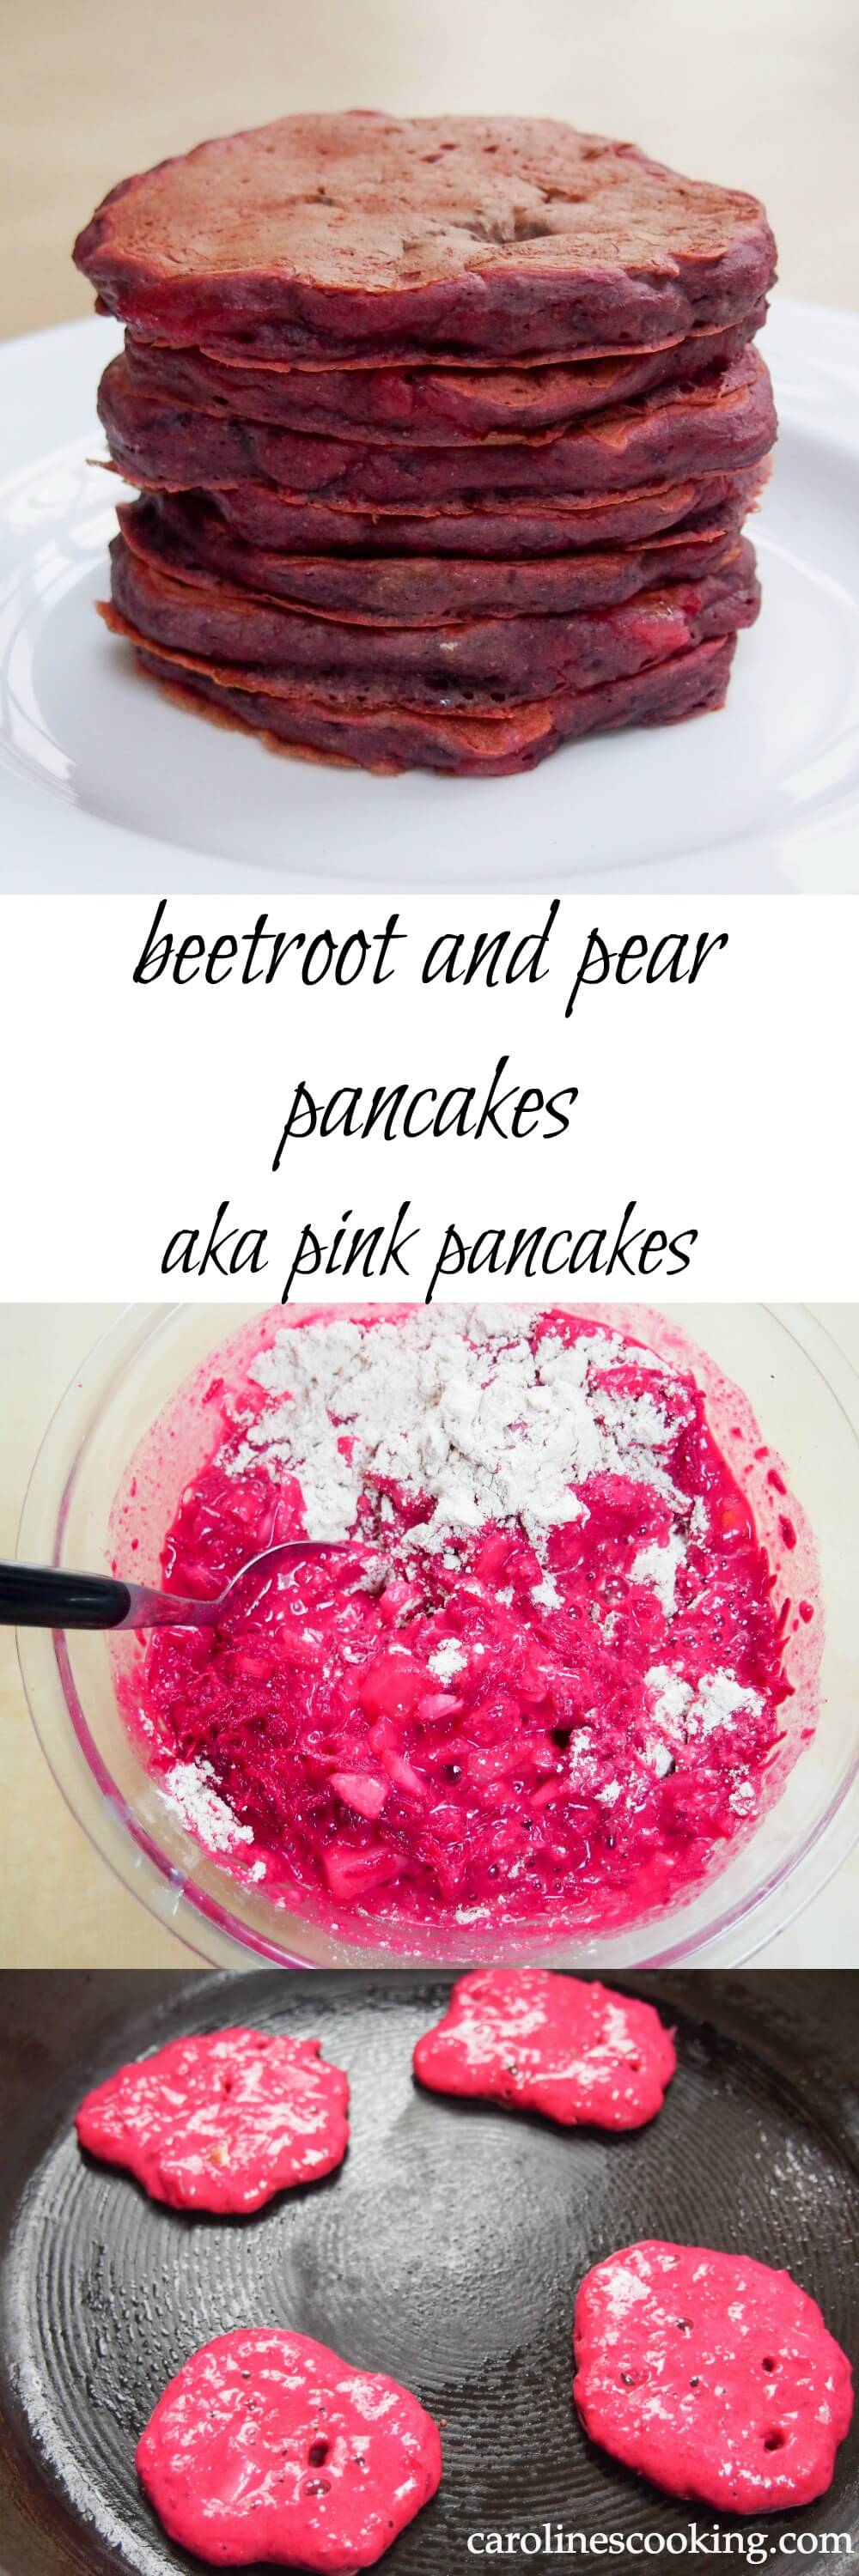 These beetroot and pear pancakes are lightly spiced and naturally sweetened, making an unusual colored but tasty breakfast or brunch.